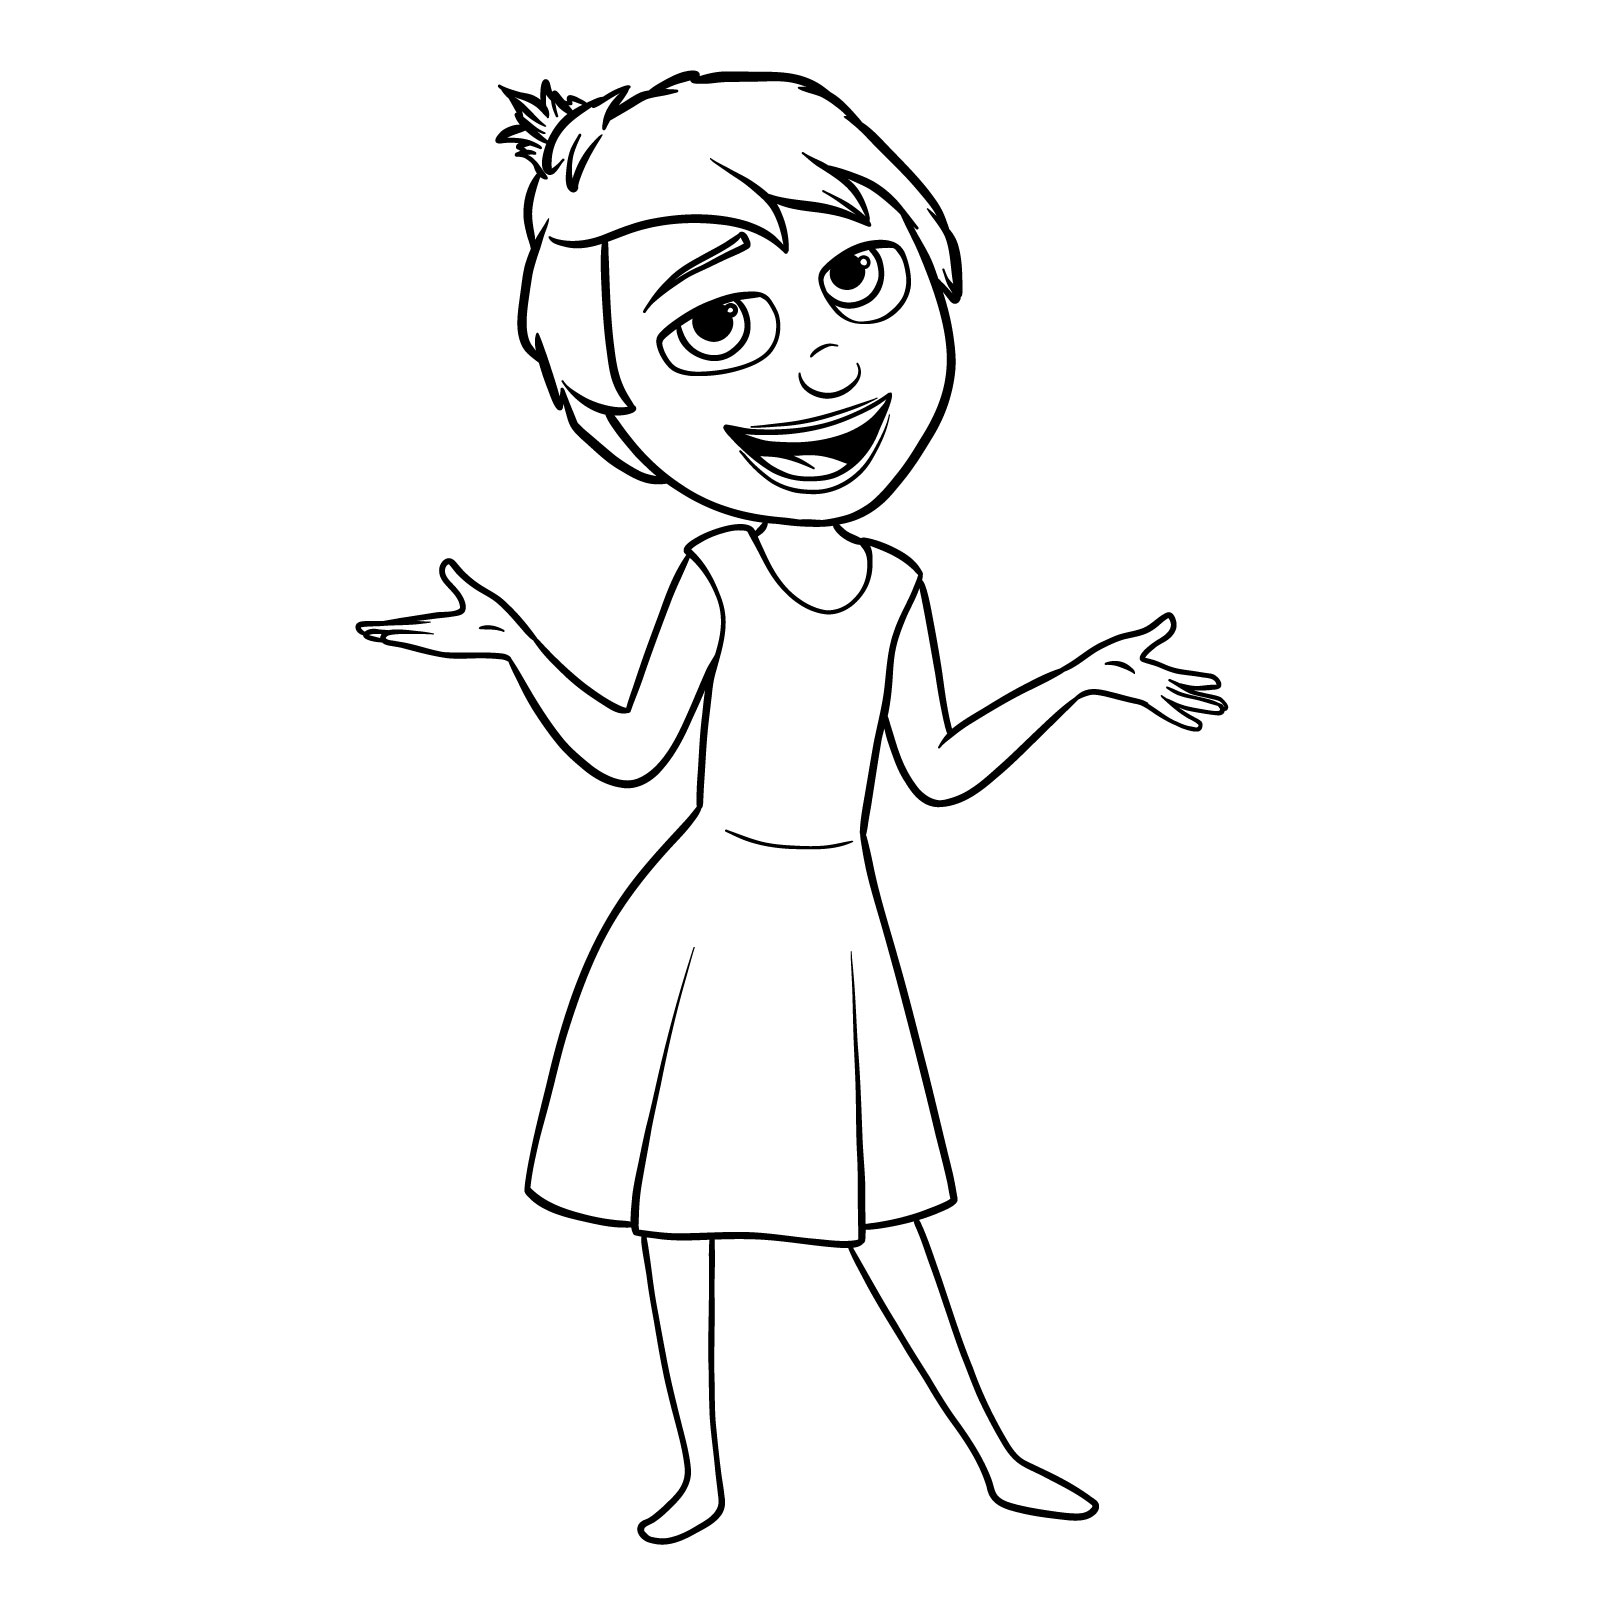 How to draw Joy from Inside Out 2 - step 13